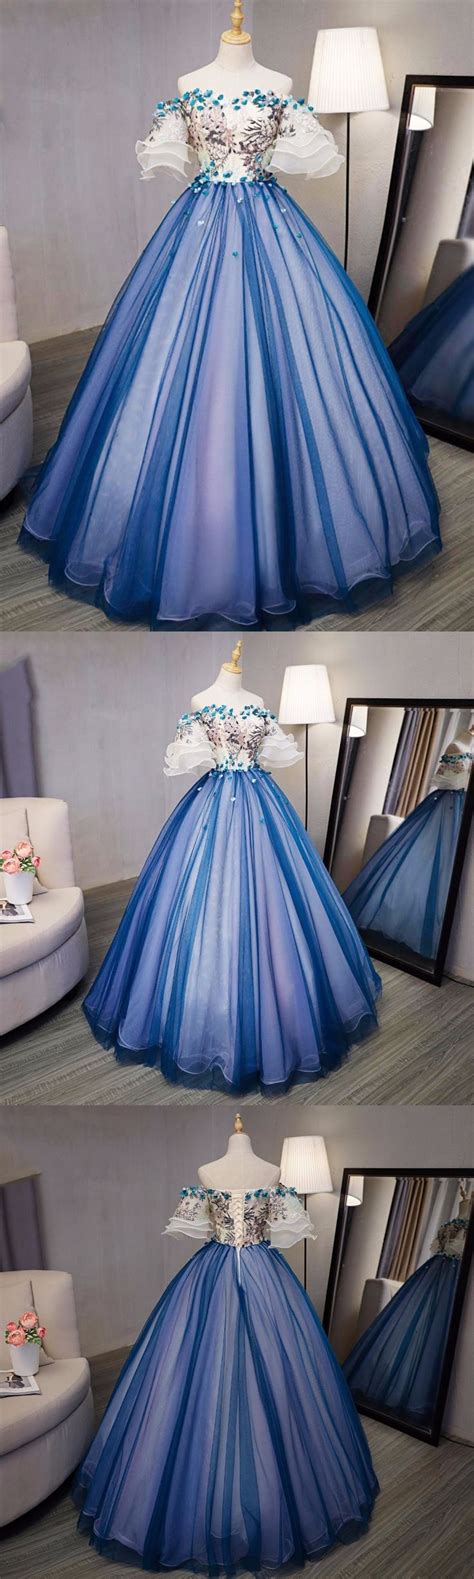 ball gown prom dresses royal blue and ivory hand made flower prom dress evening dress jkl348